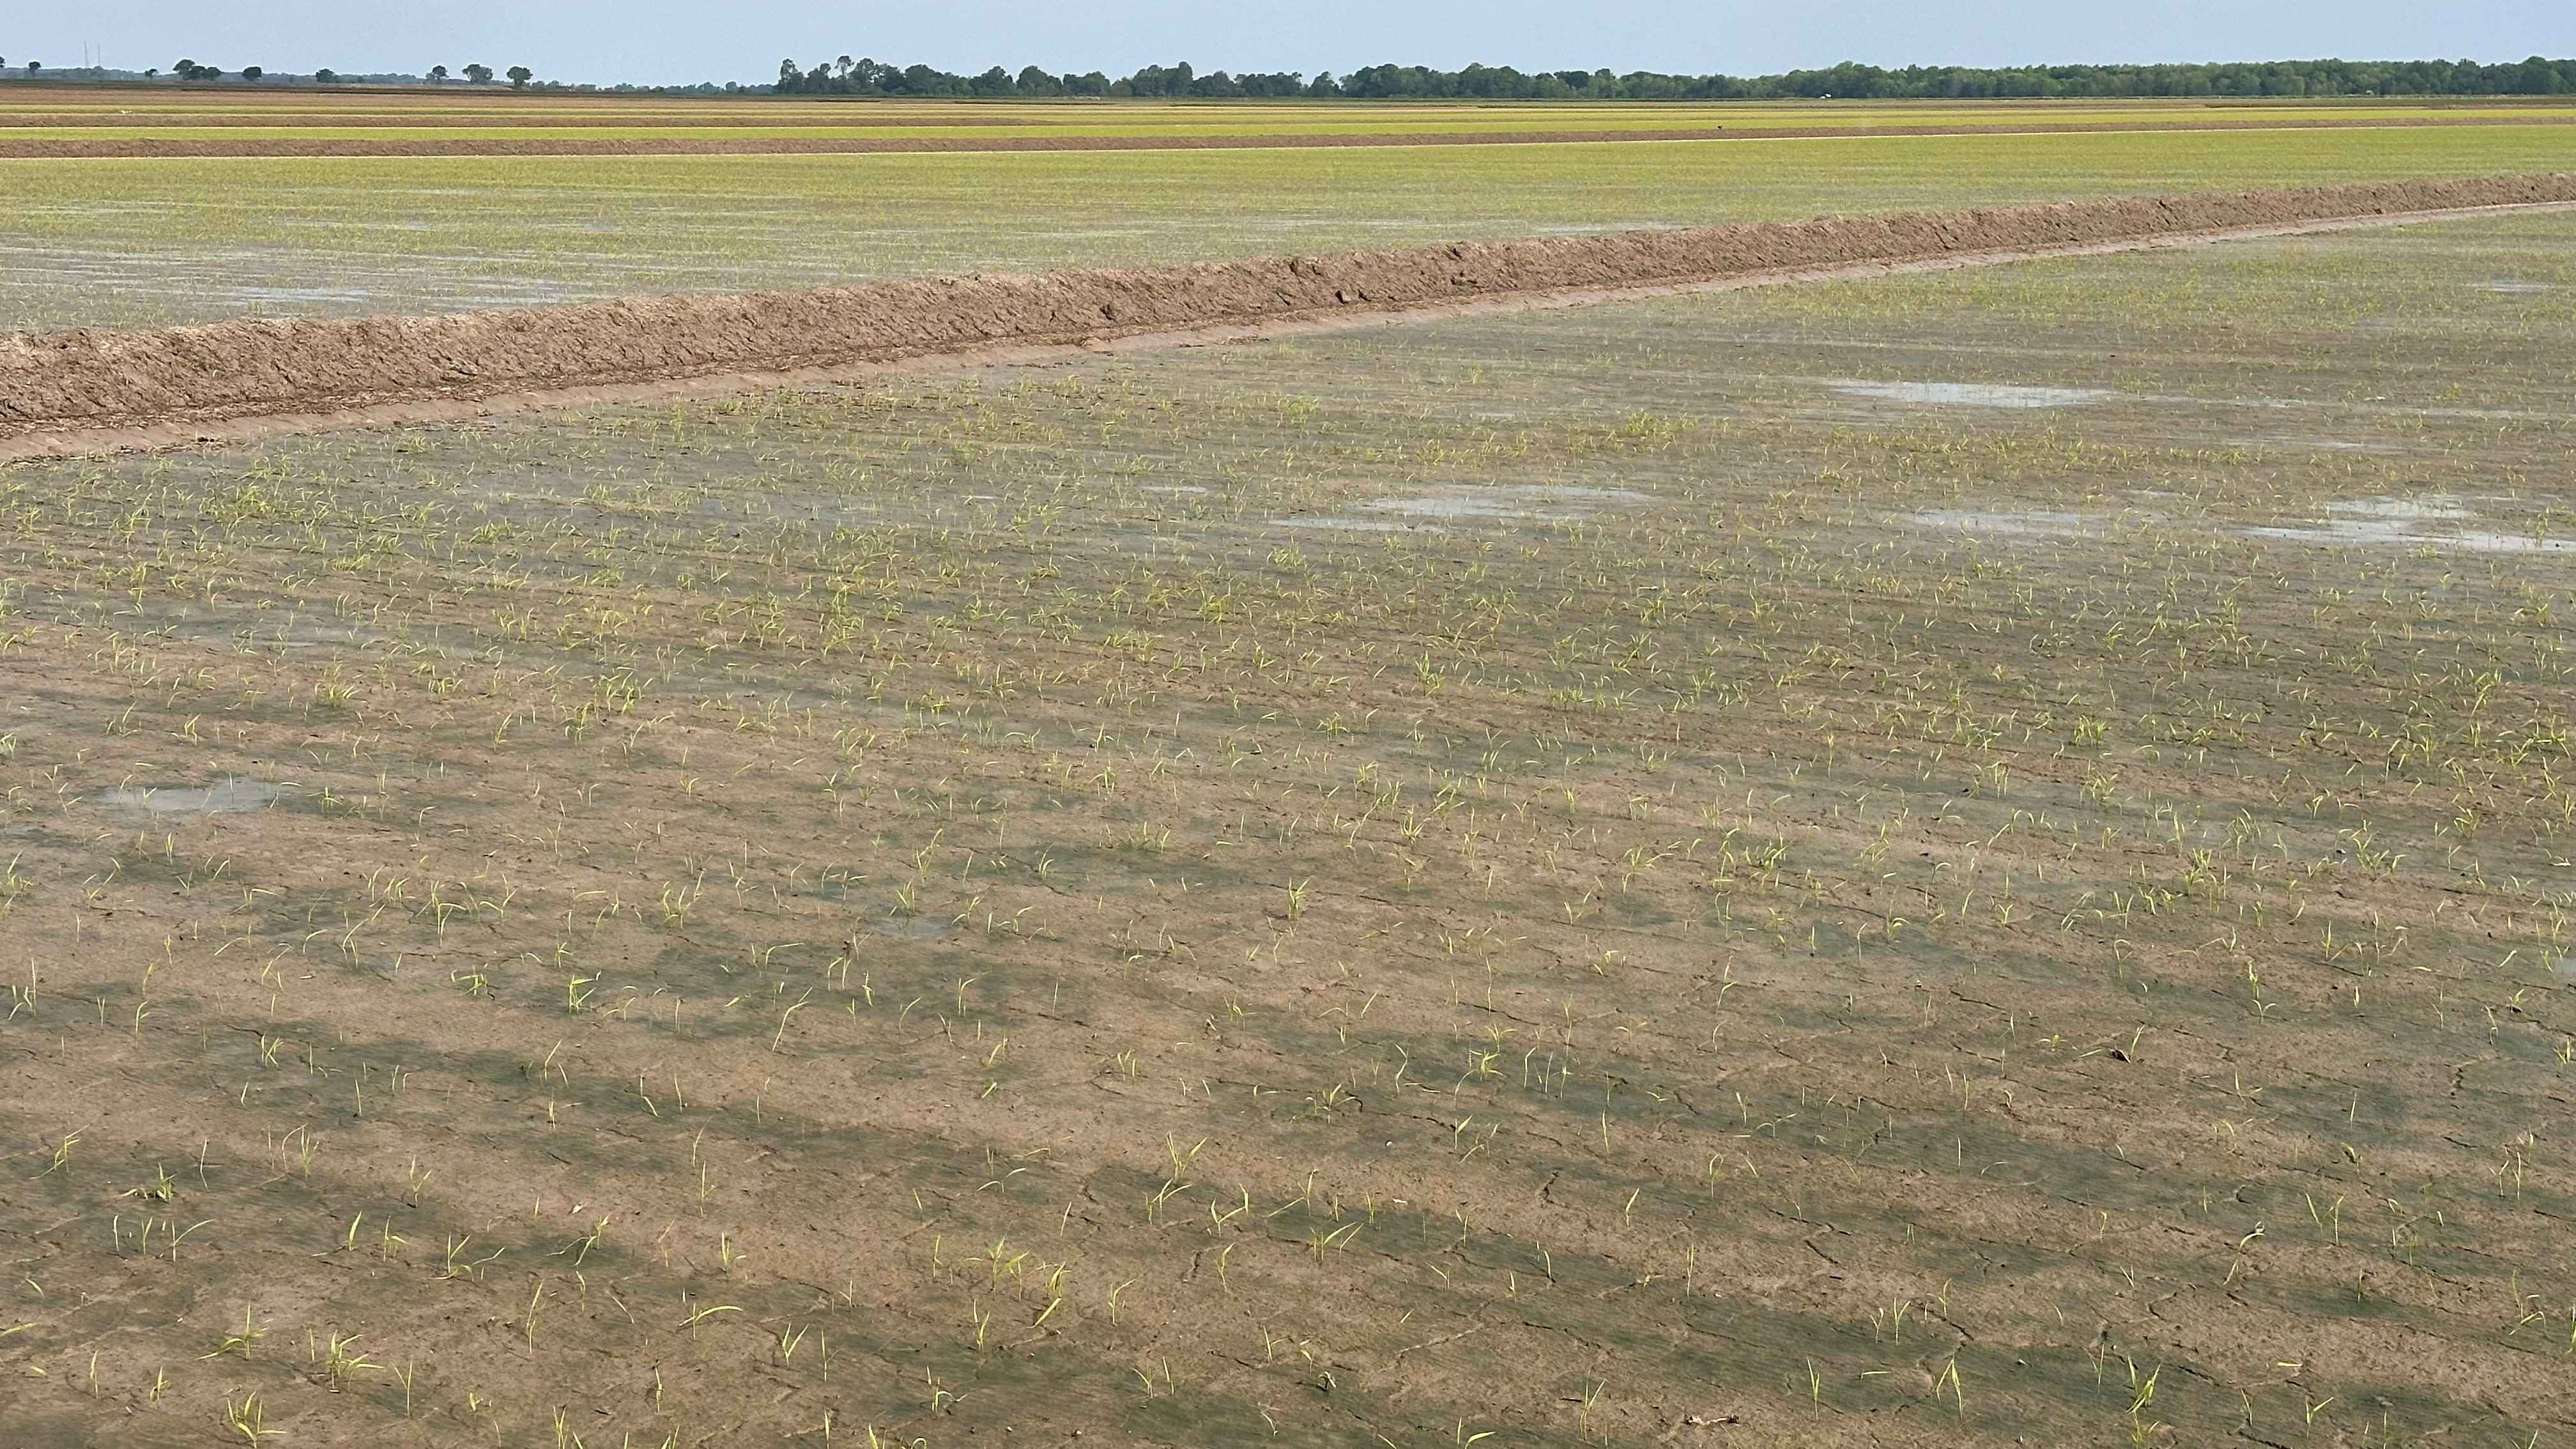 Poor looking rice from recent weather conditions